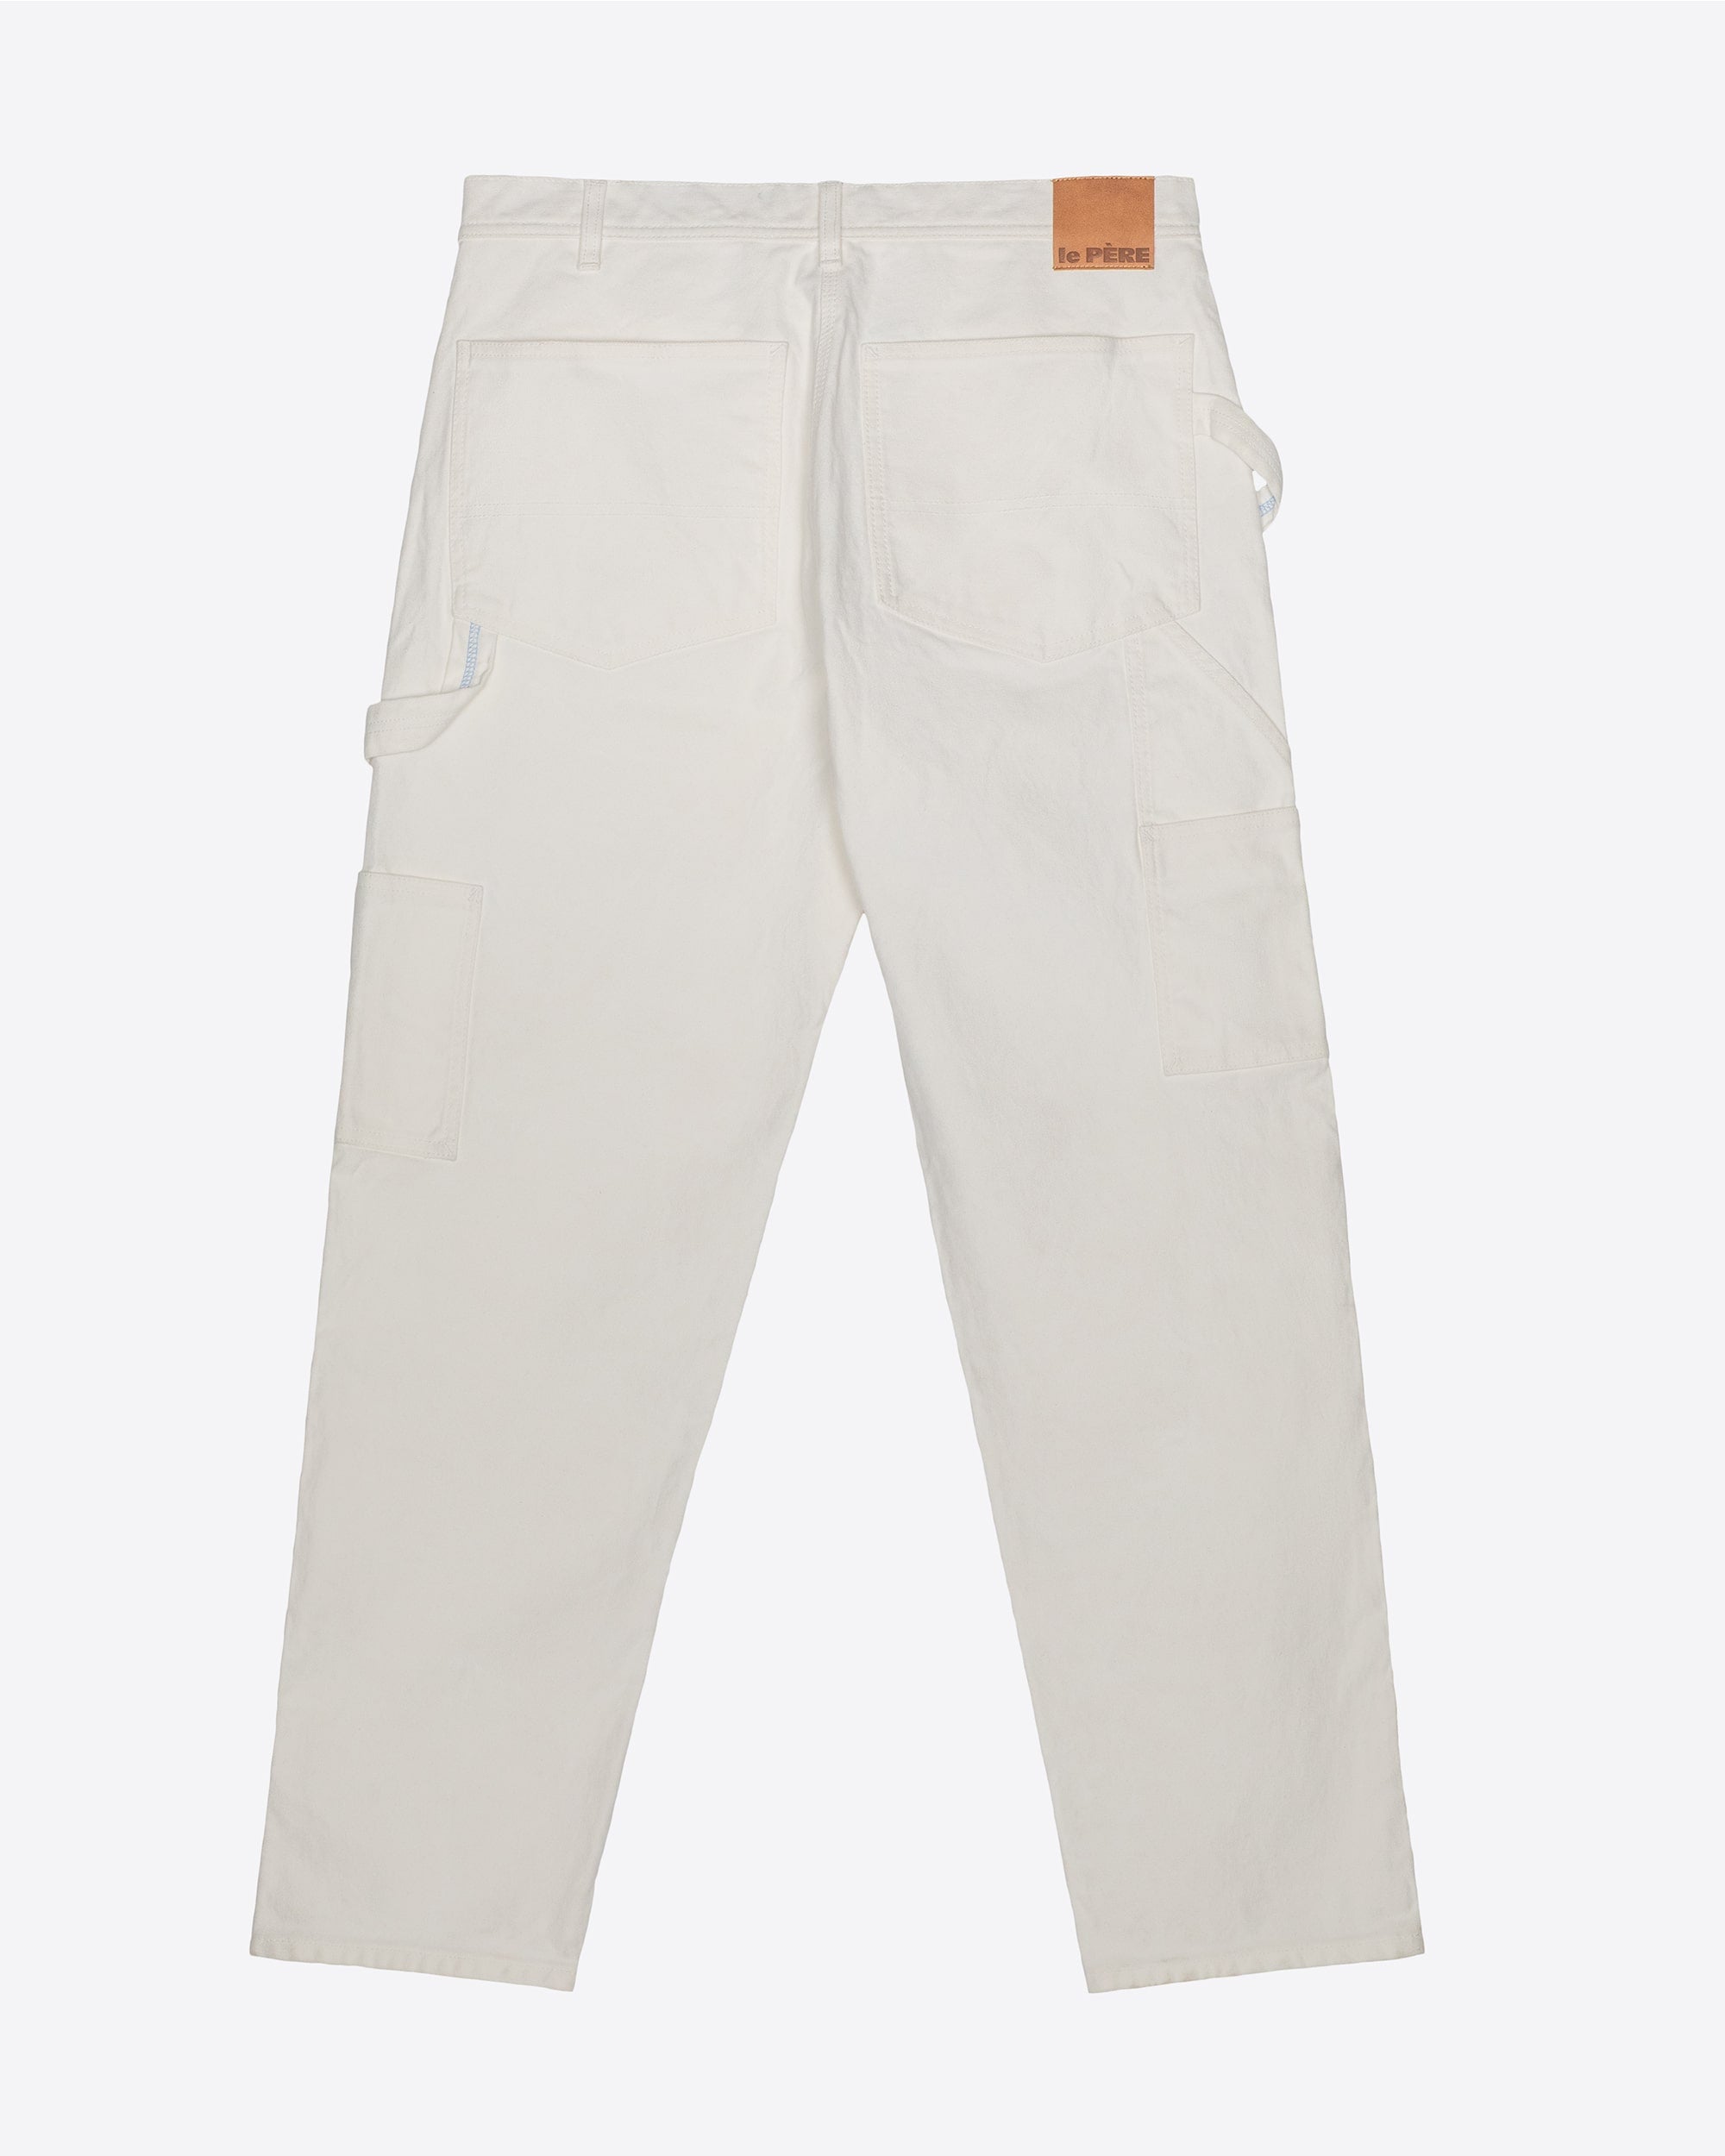 Painters Trousers  Painting  Decorating Trousers  Buy Online at  Tuffshopcouk